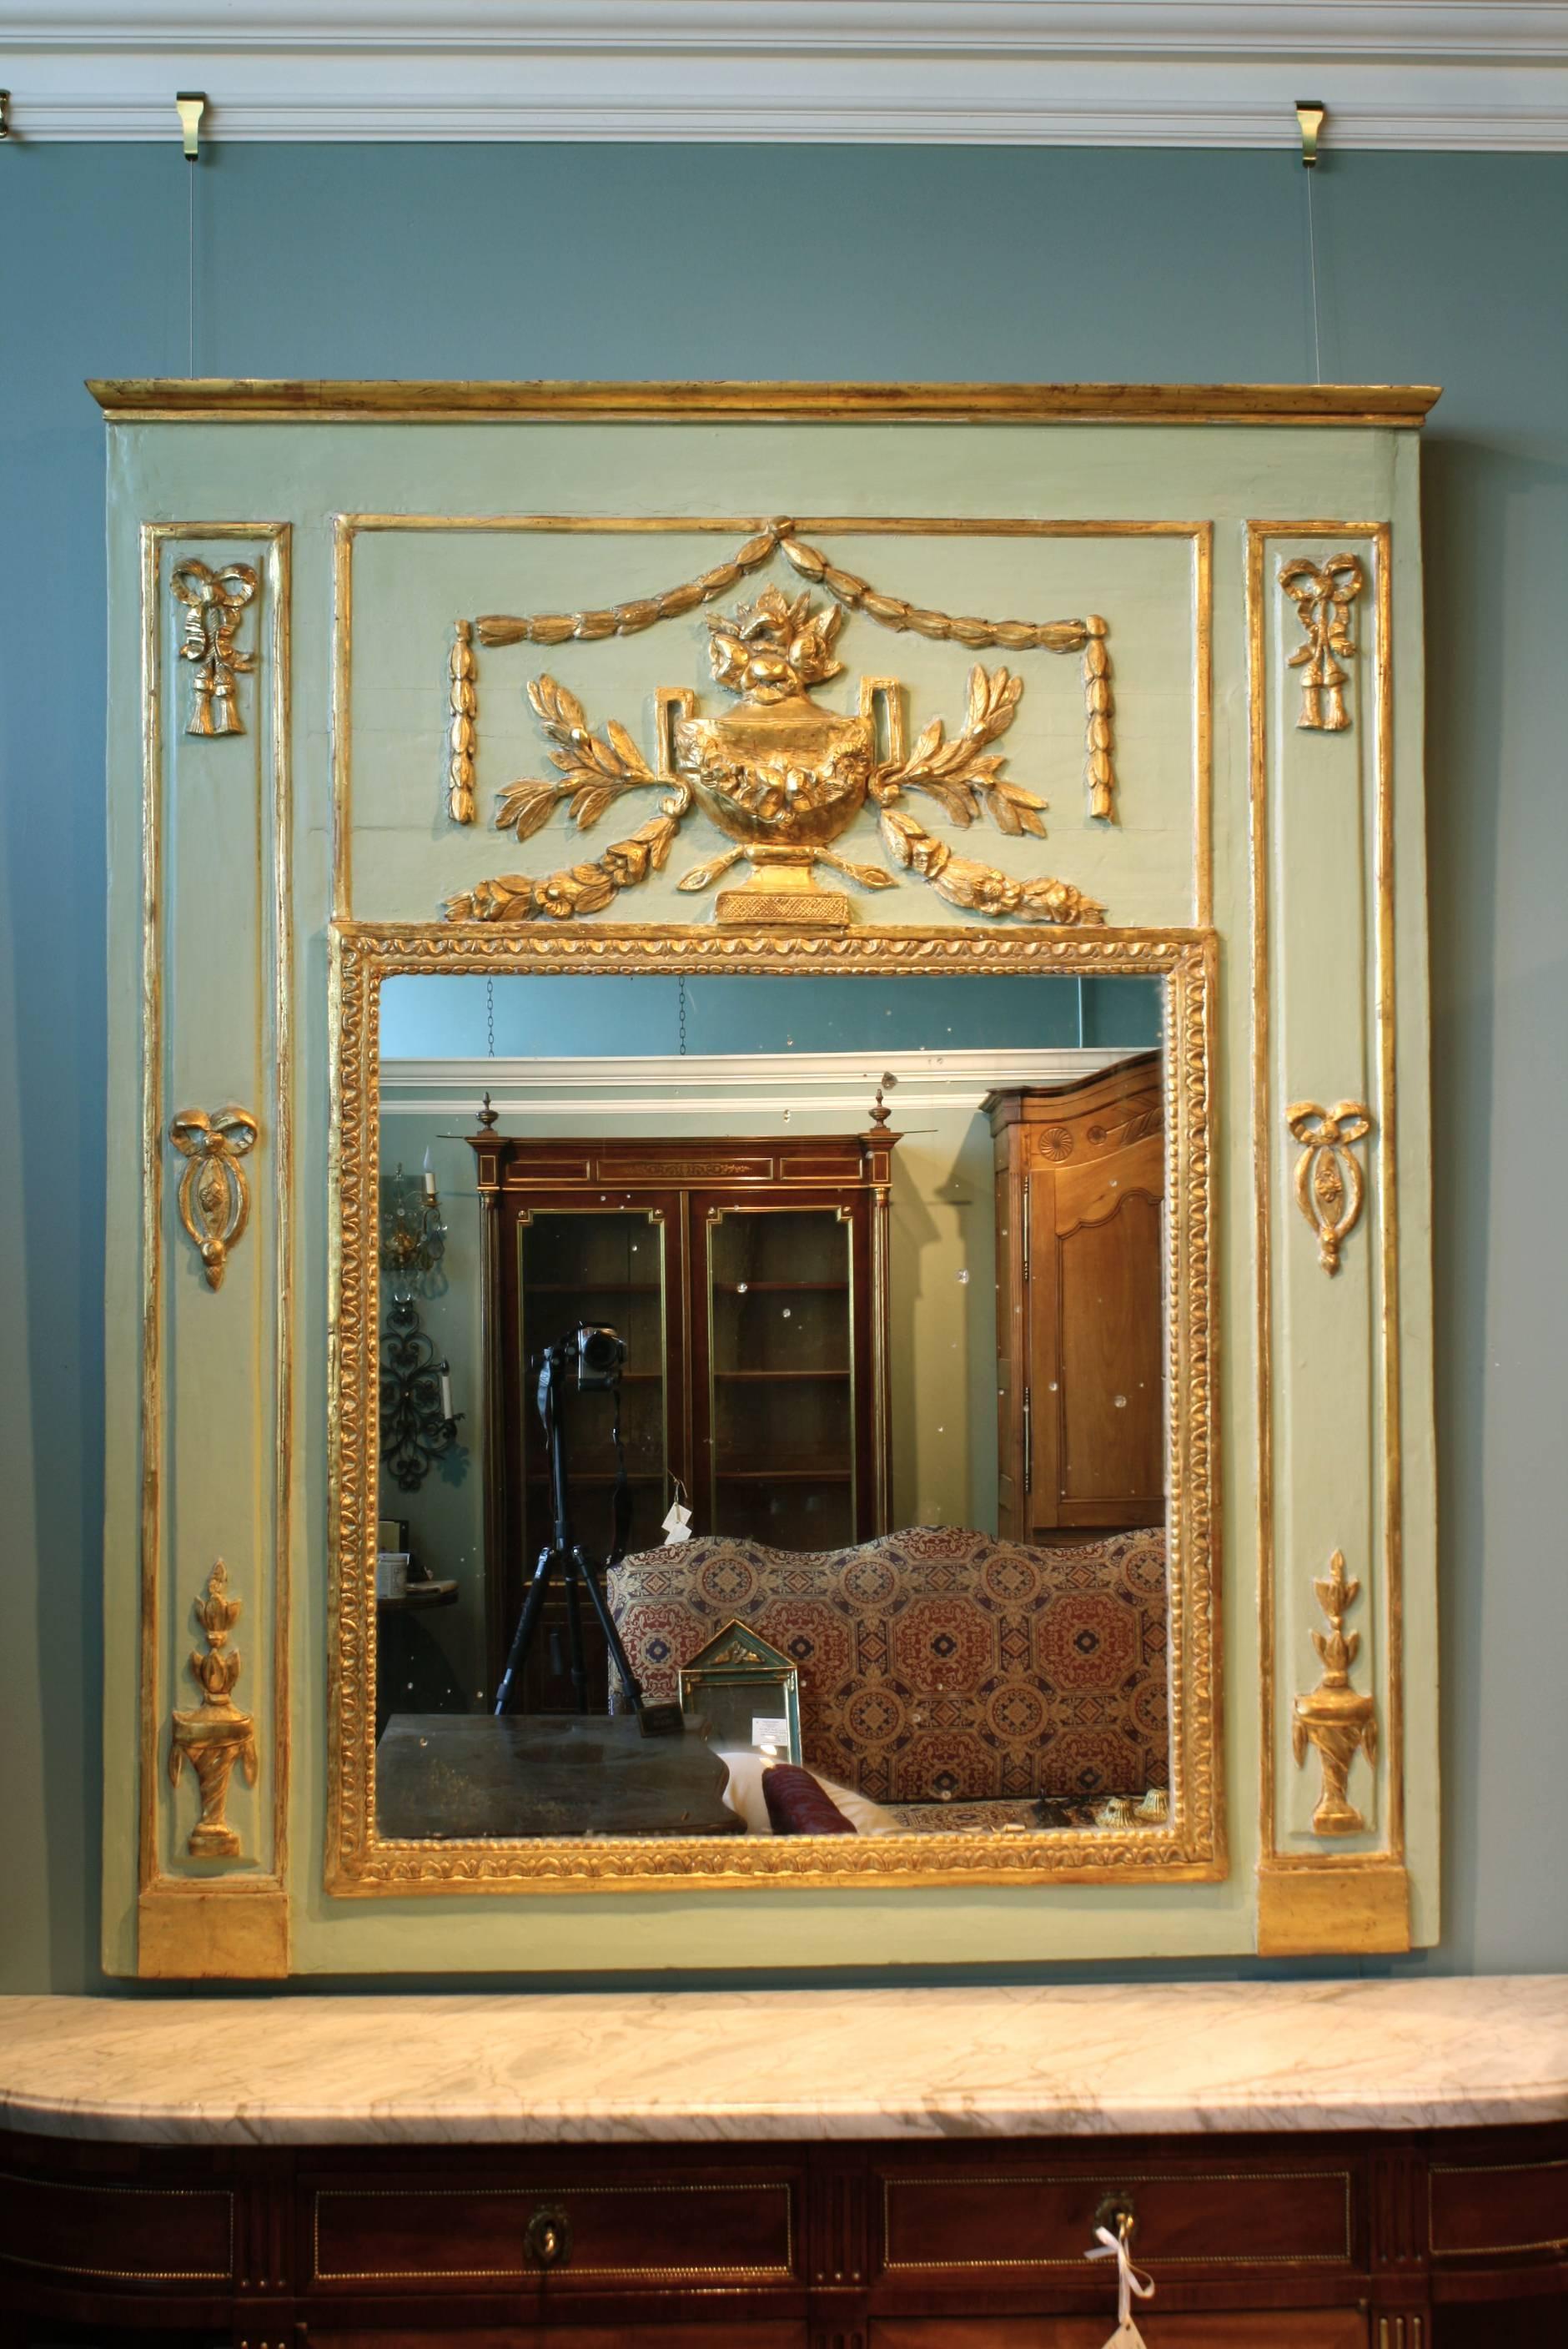 A large scale French Louis XVI period trumeau mirror, with neoclassical detailing, including a large urn with swags and acanthus boughs, bows and smaller urns decorating the sides. The mercury glass appears to be original, and the trumeau has an old